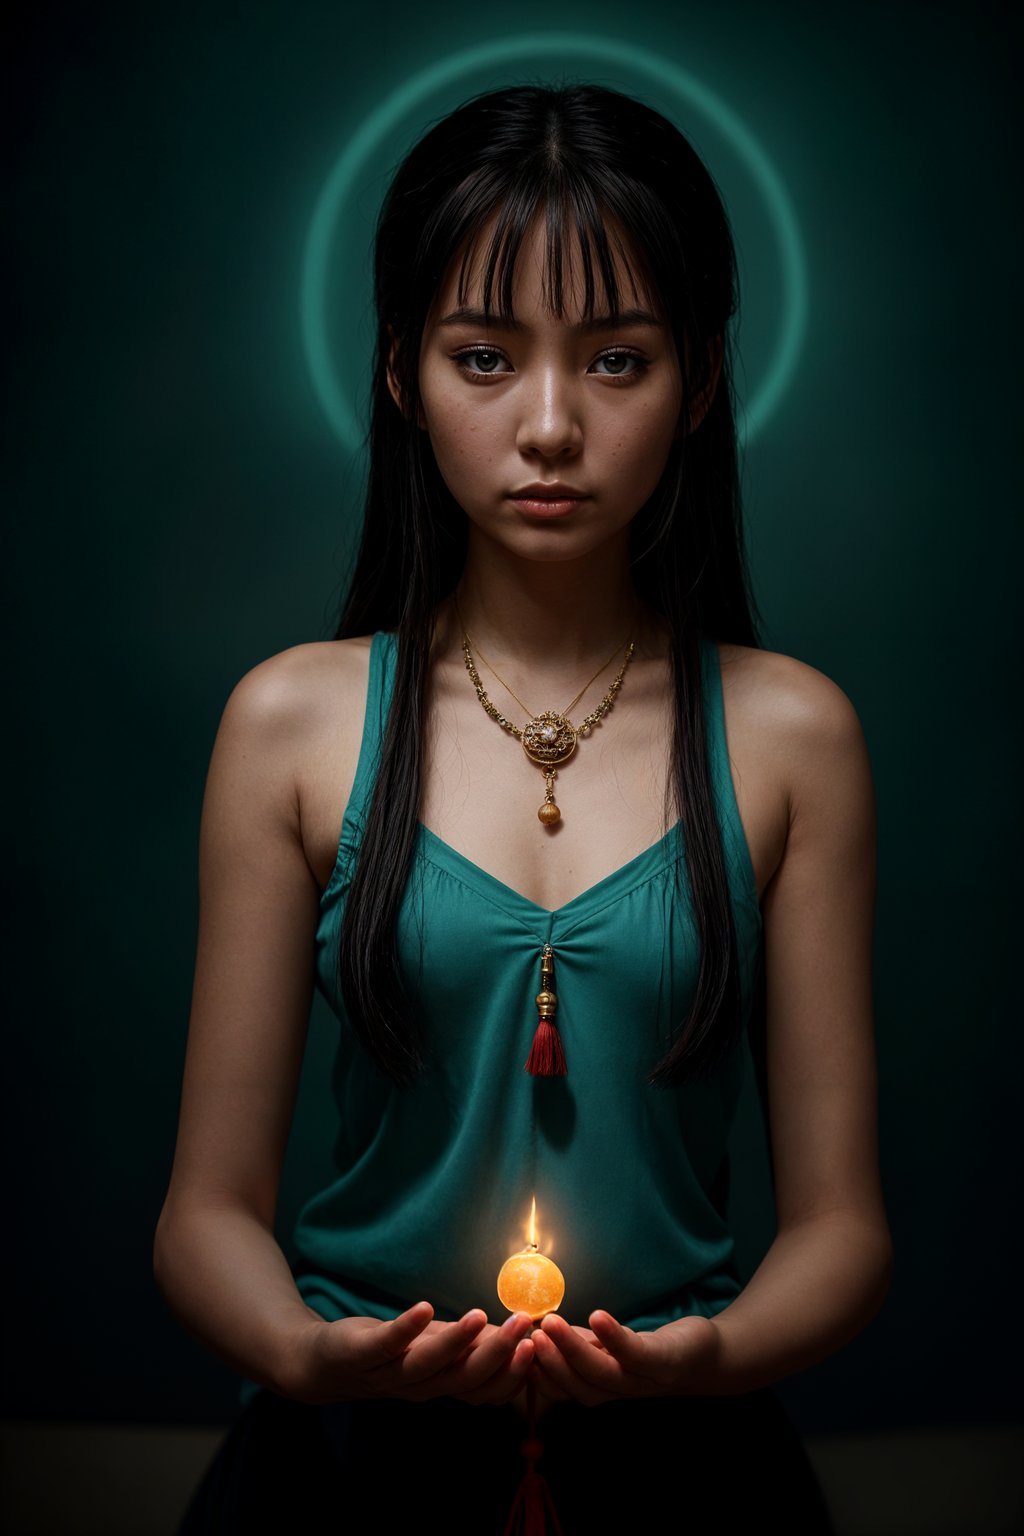 woman holding prayer beads or a sacred object, engrossed in a prayer or a meditative state, capturing the devotion and connection to higher realms